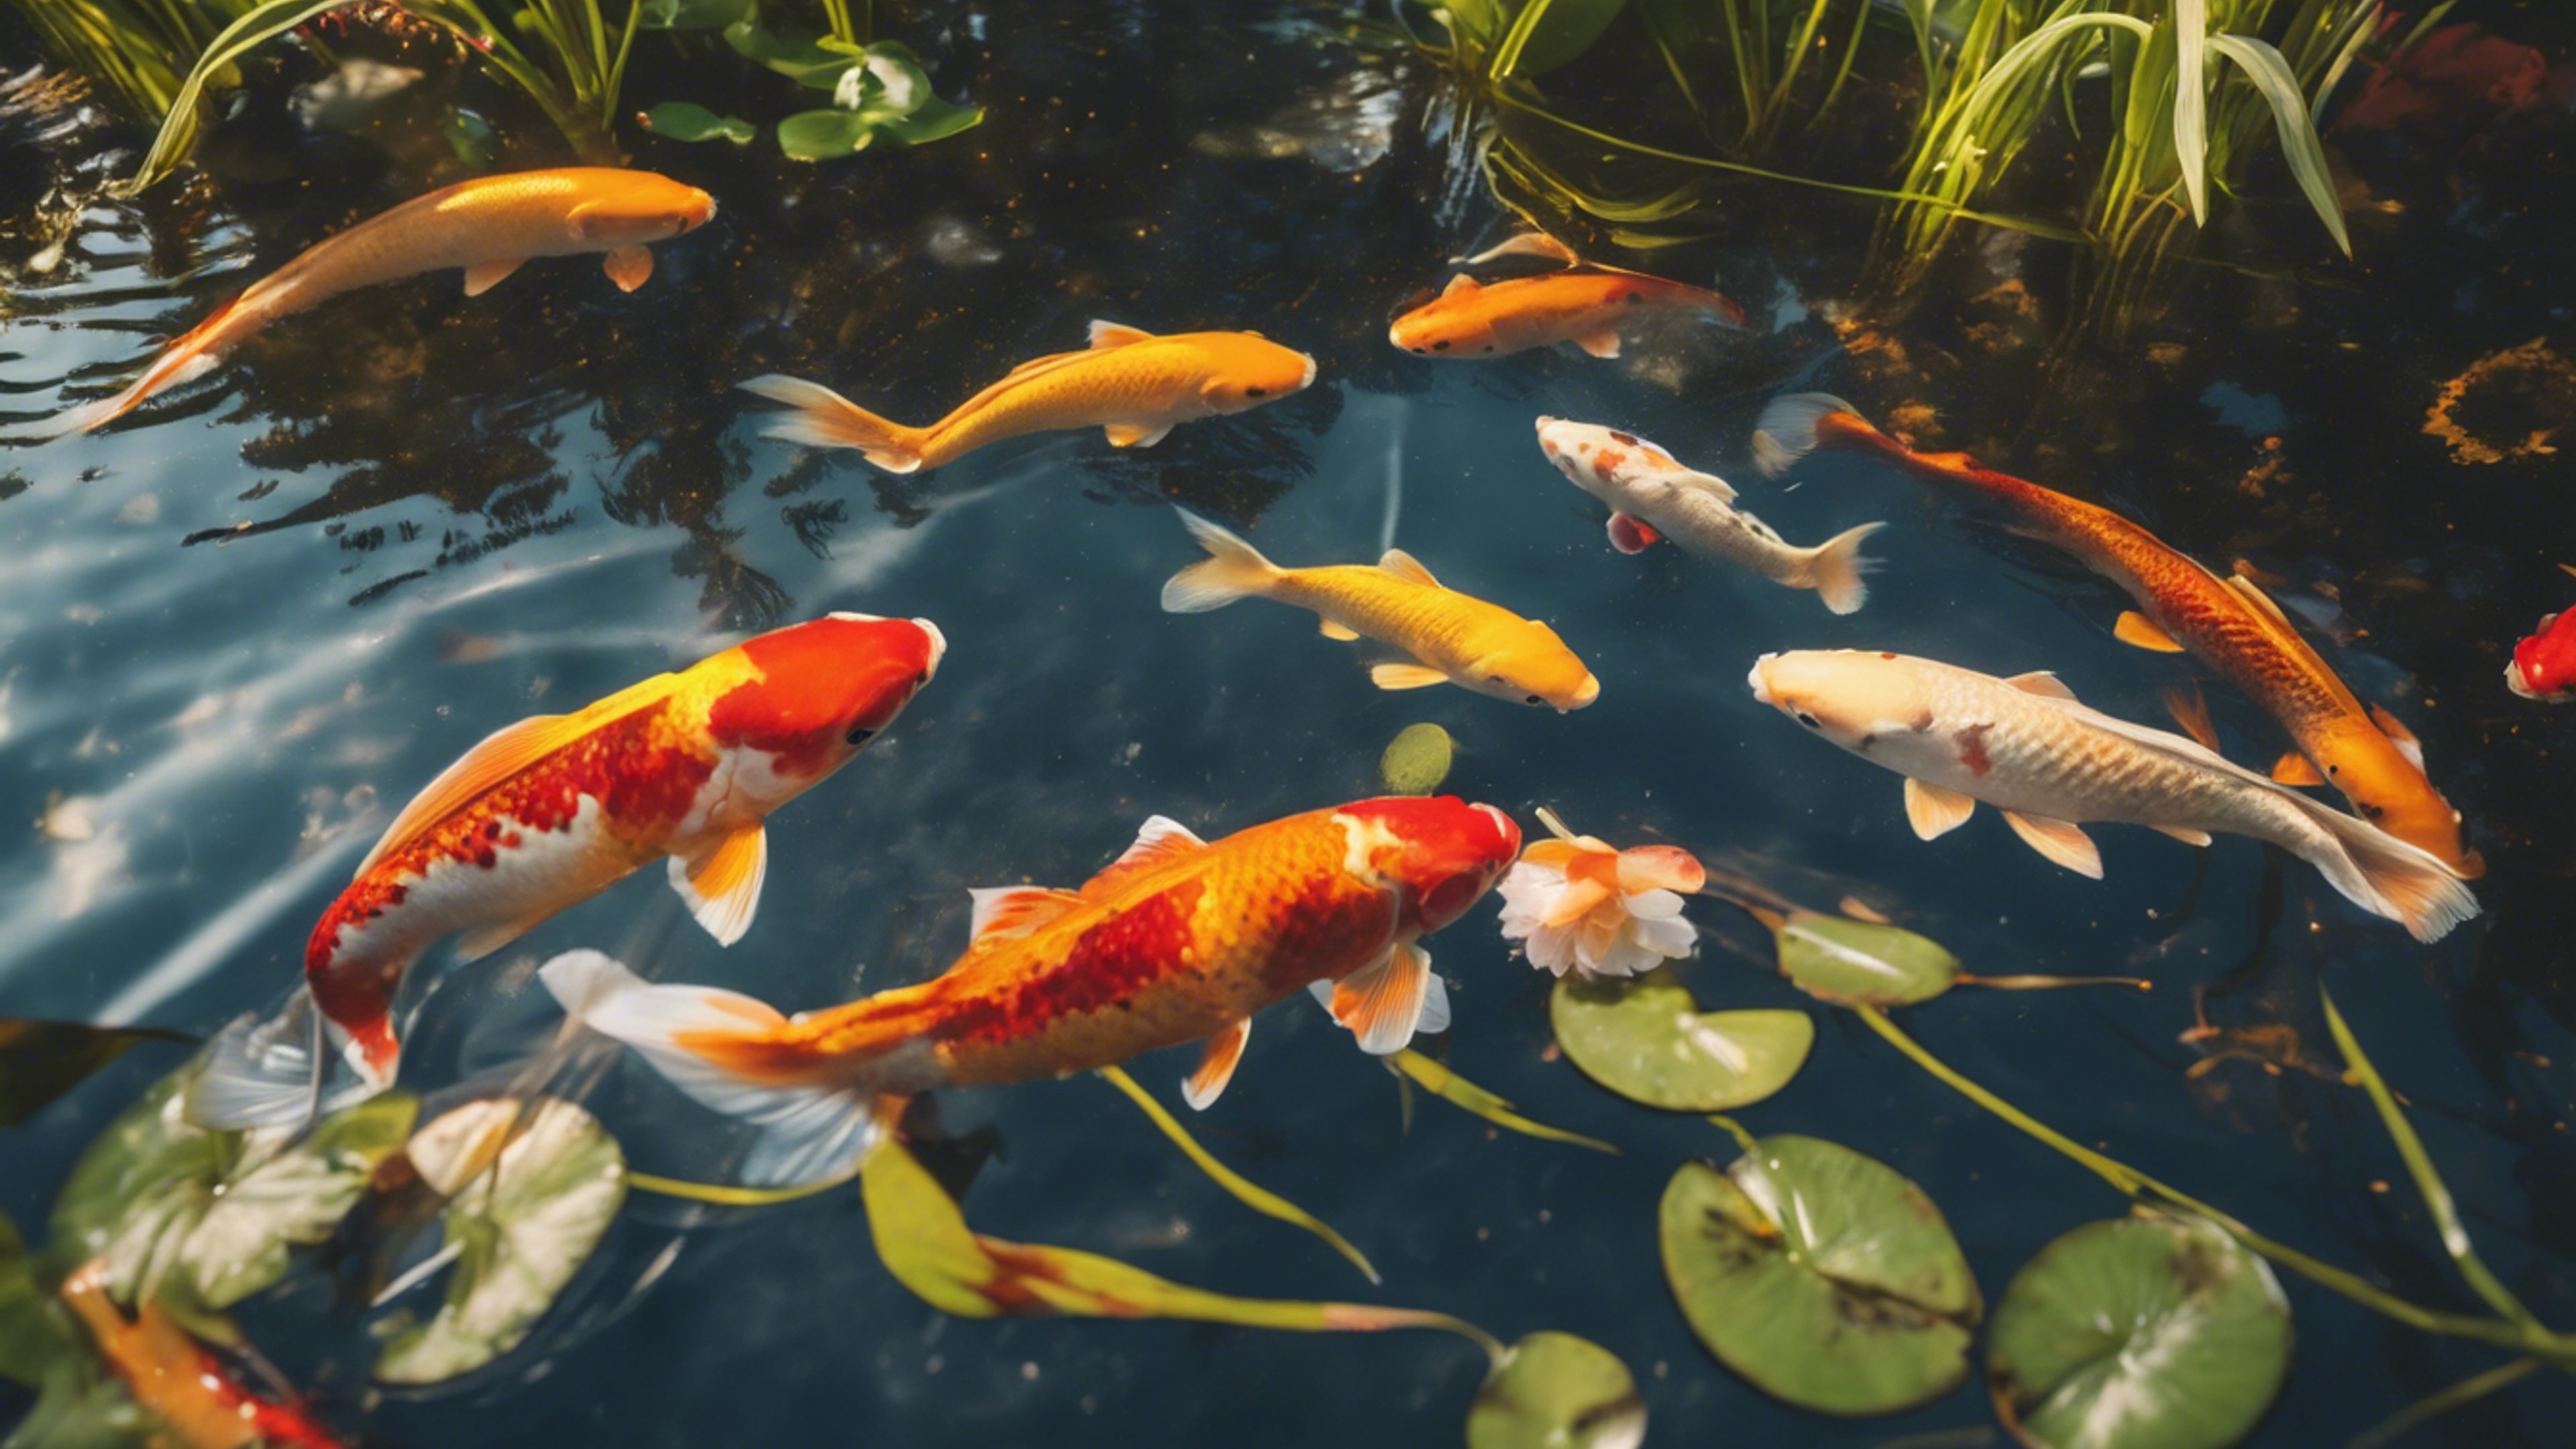 A koi pond with fish swirling under the lilies, their cool red and vibrant yellow scales shimmering under the sun. Papel de parede[e1c53d91cfb64fffb364]